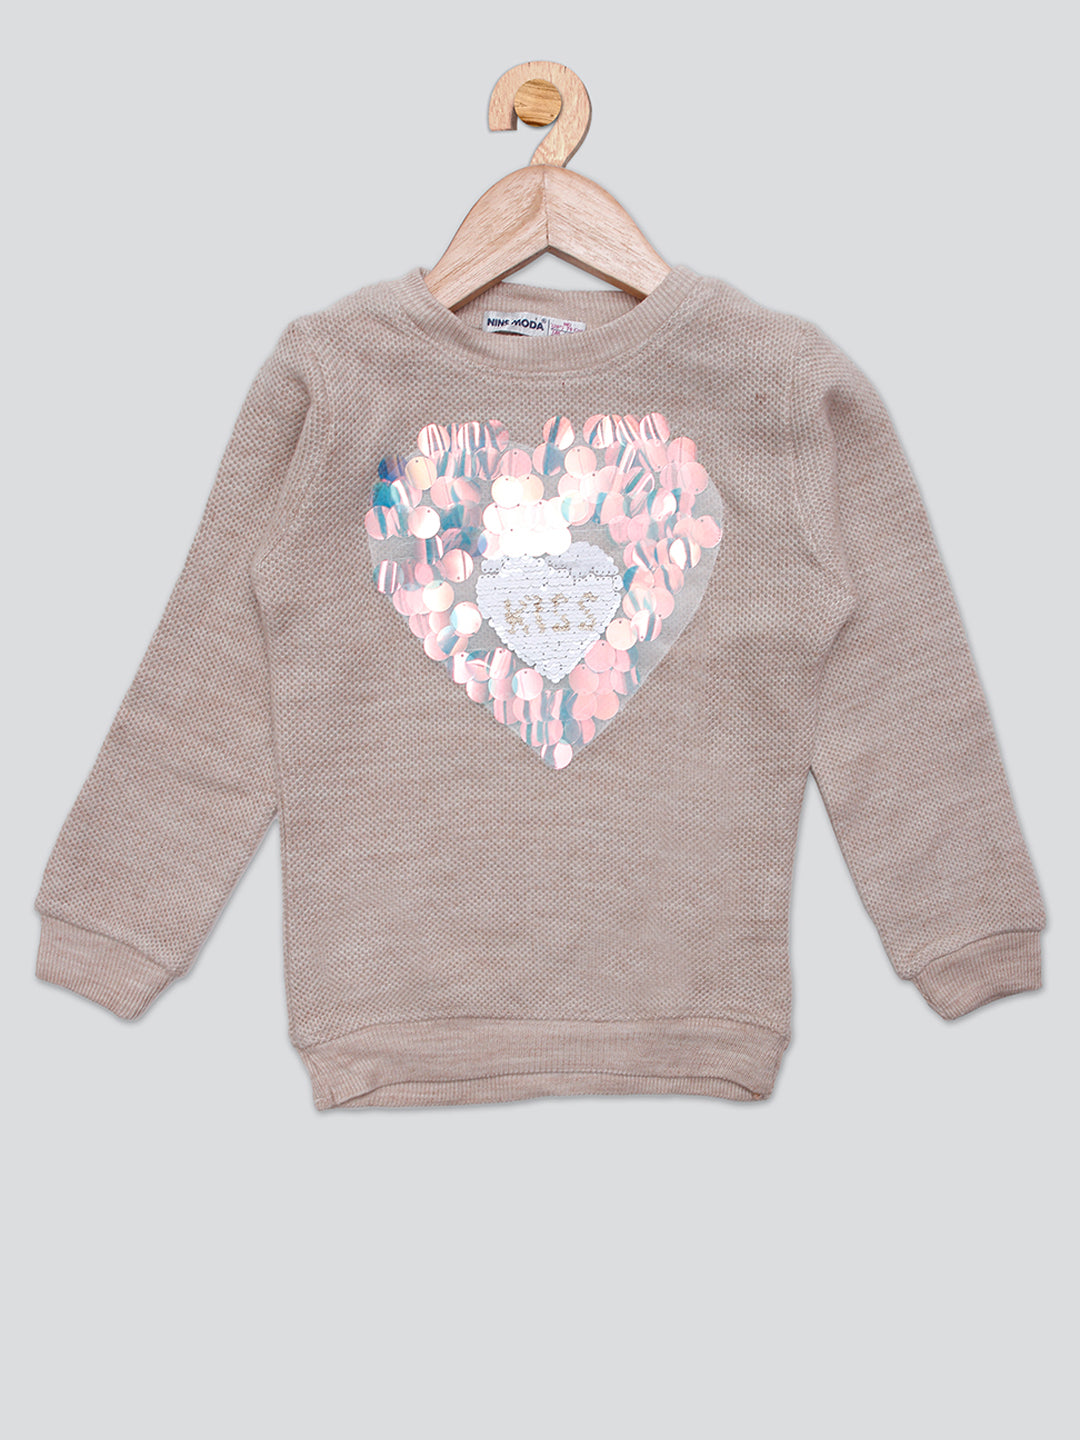 Pampolina Girls Sequined Printed Woolen Top-Fawn